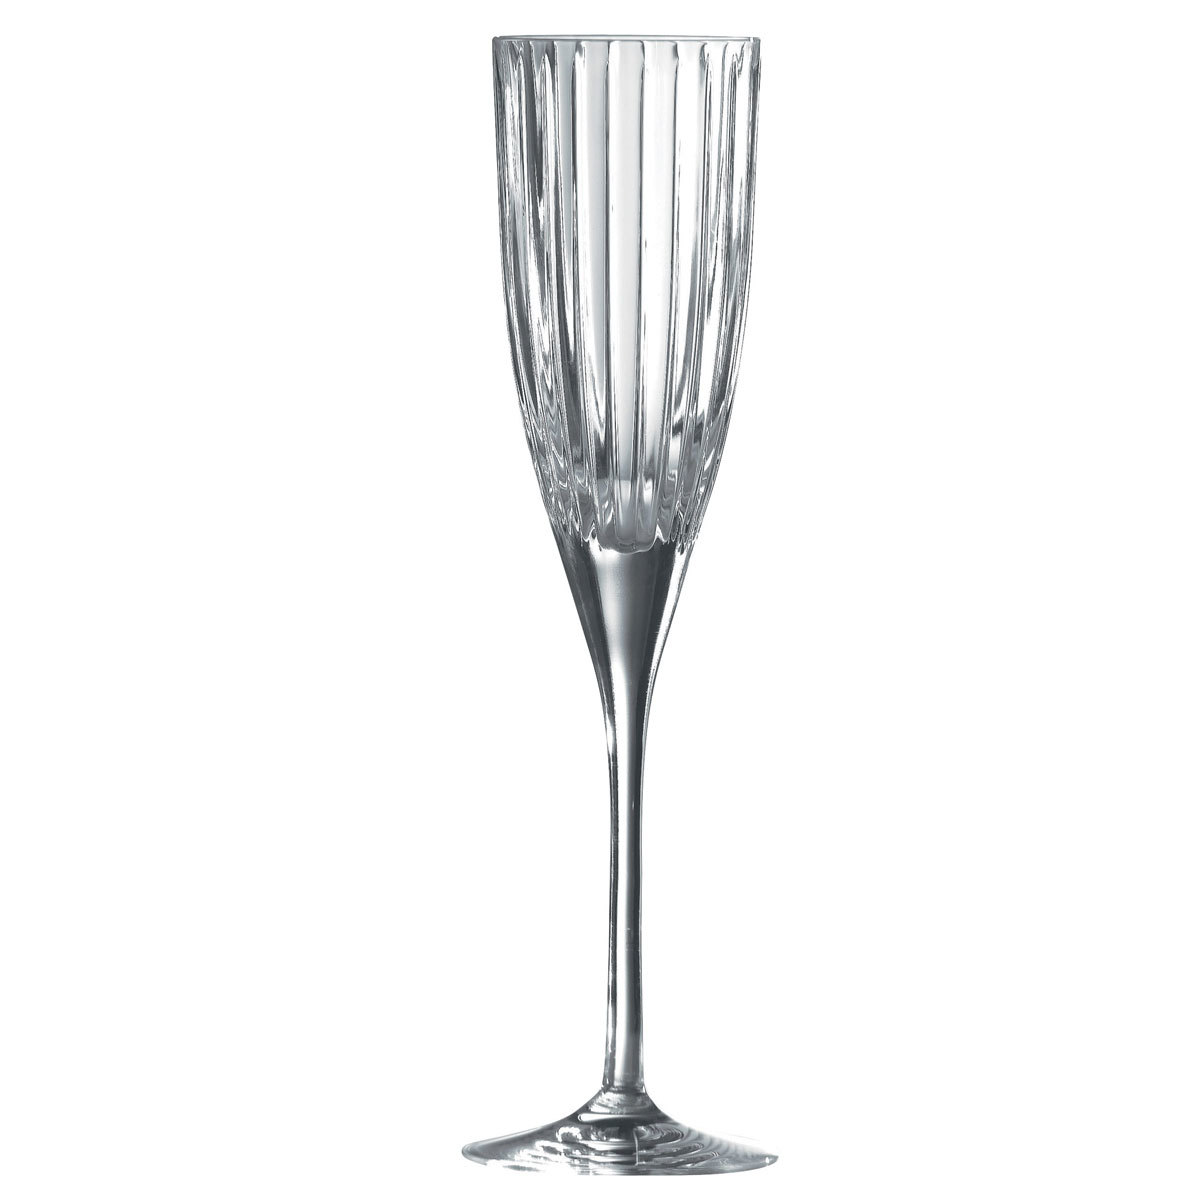 Royal Doulton Linear Crystal Champagne Flutes, 6 Pack